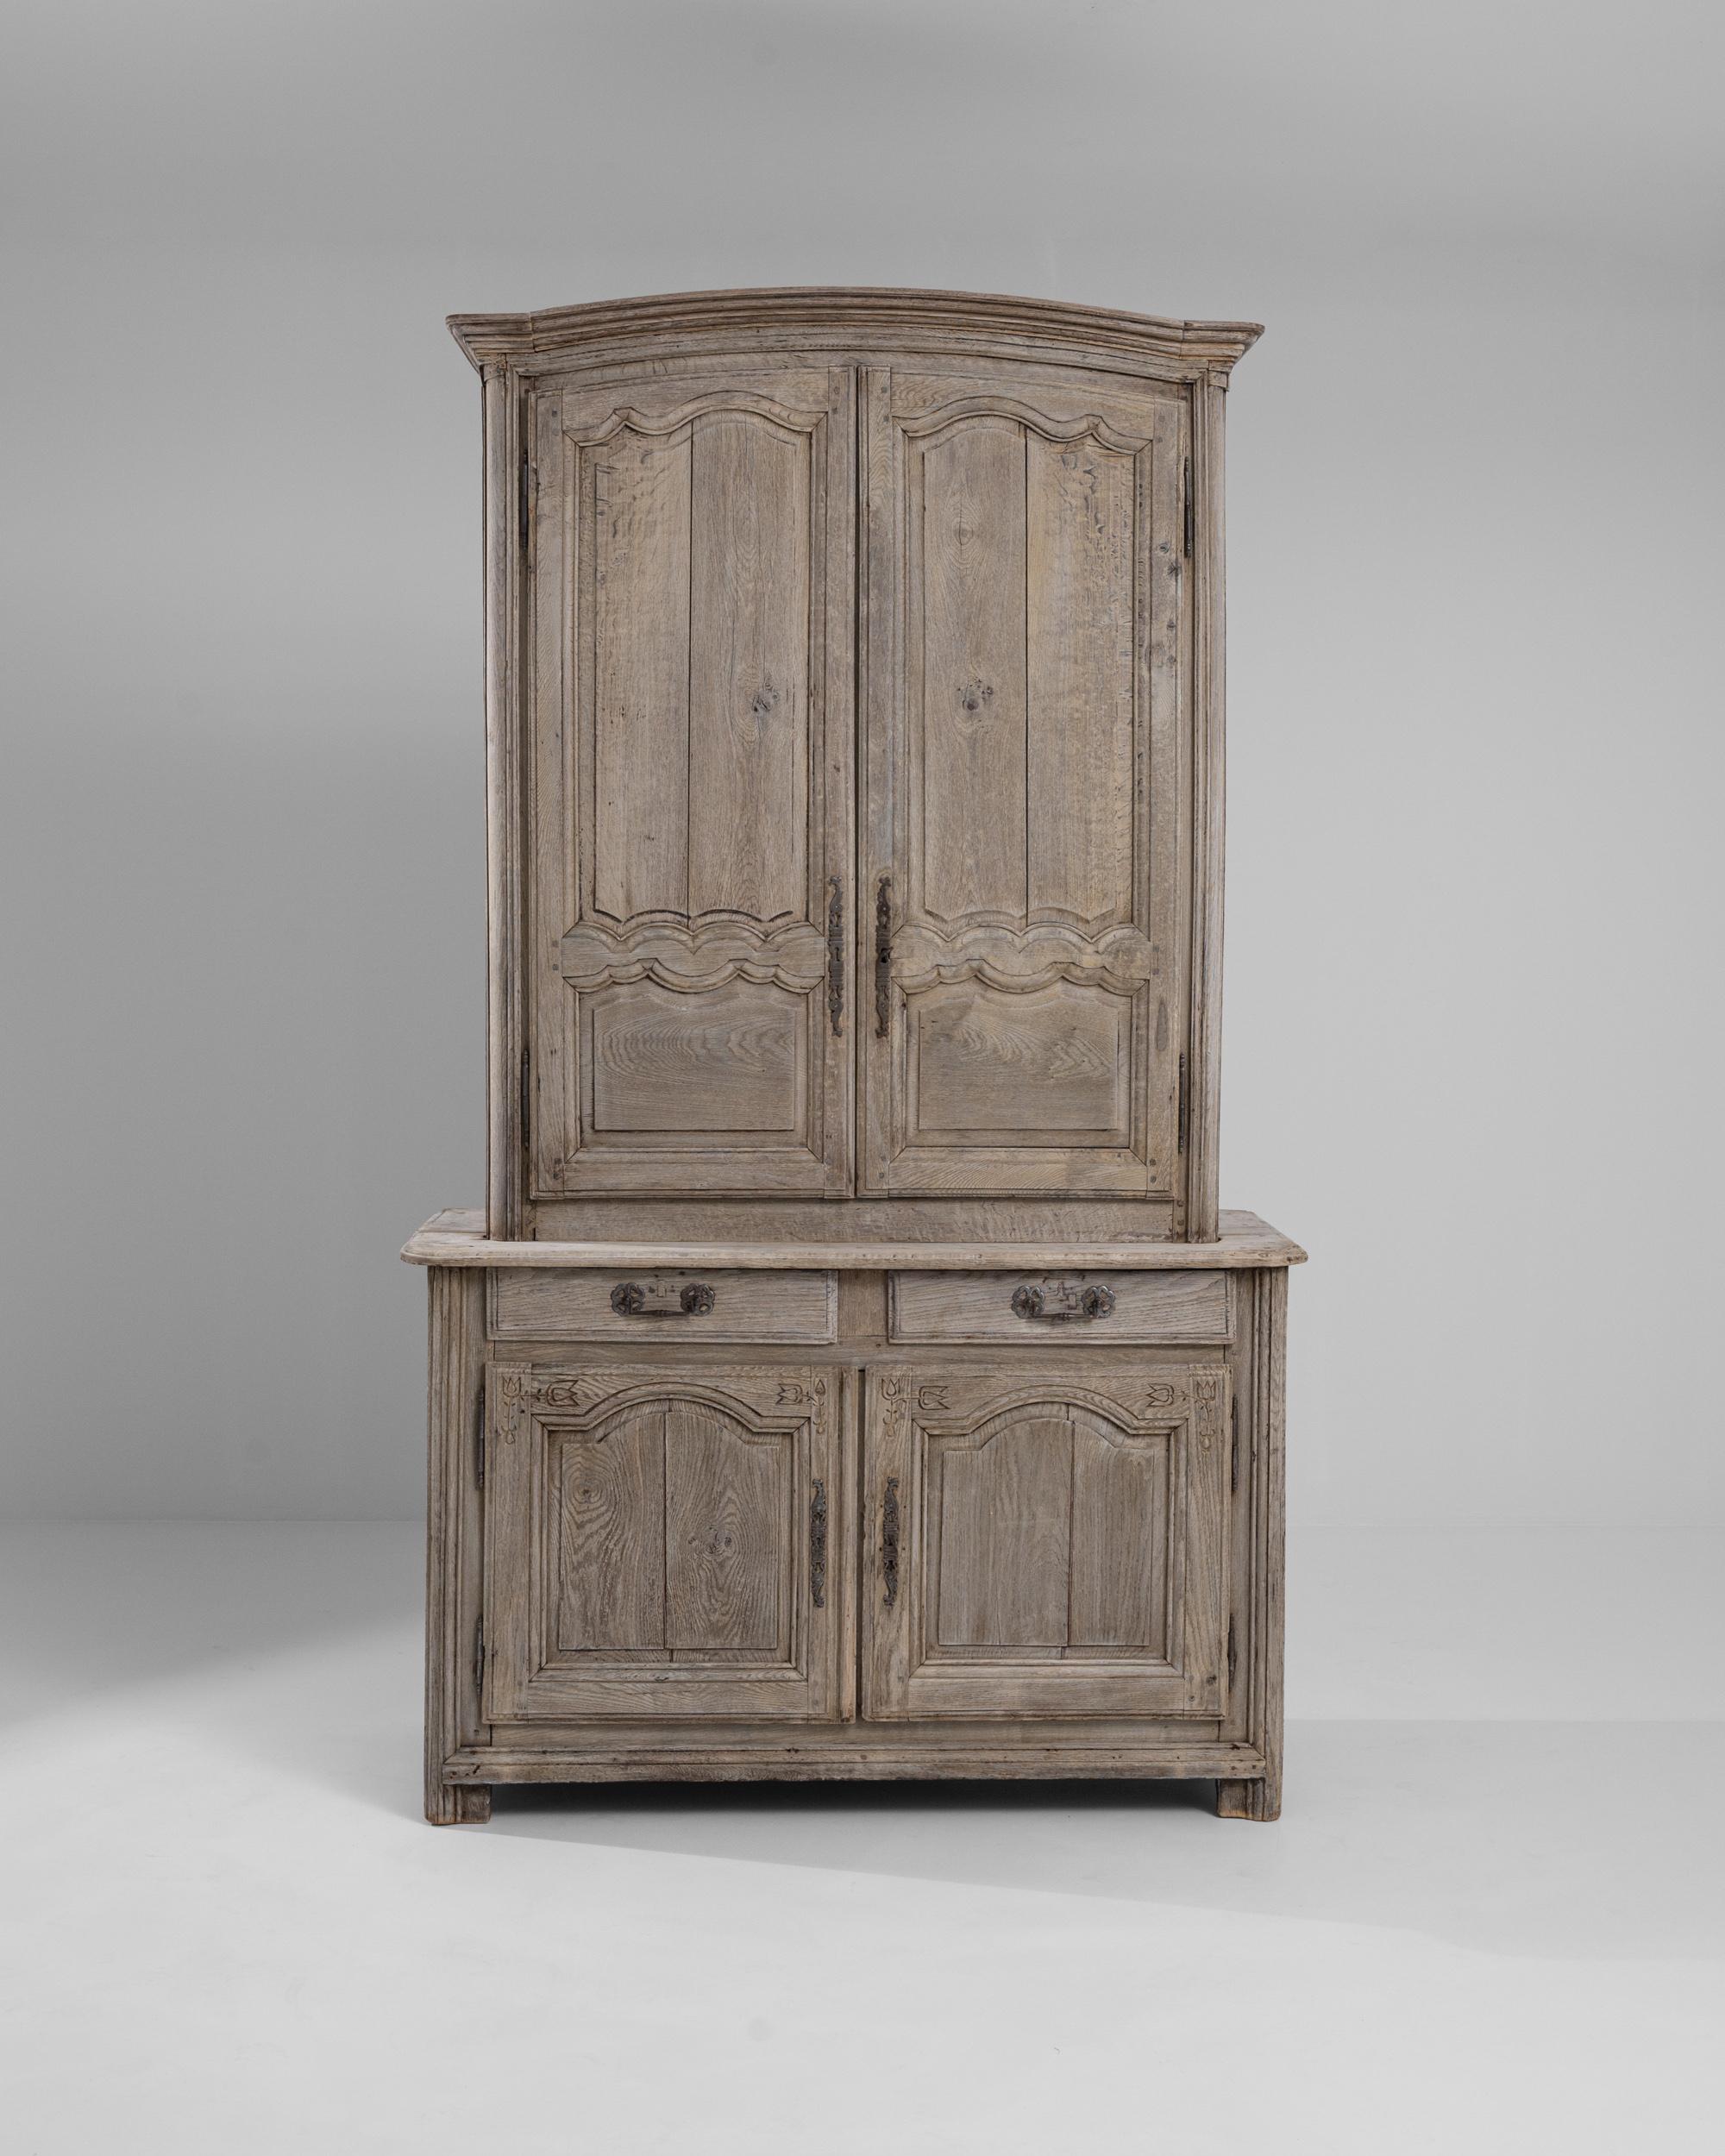 A wooden cabinet from 19th century France. This large cabinet is composed with plenty of storage, lots of shelves up and down, with two sliding drawers in between. Combining rustic charm with refined elegance, this artisanally crafted cabinet offers